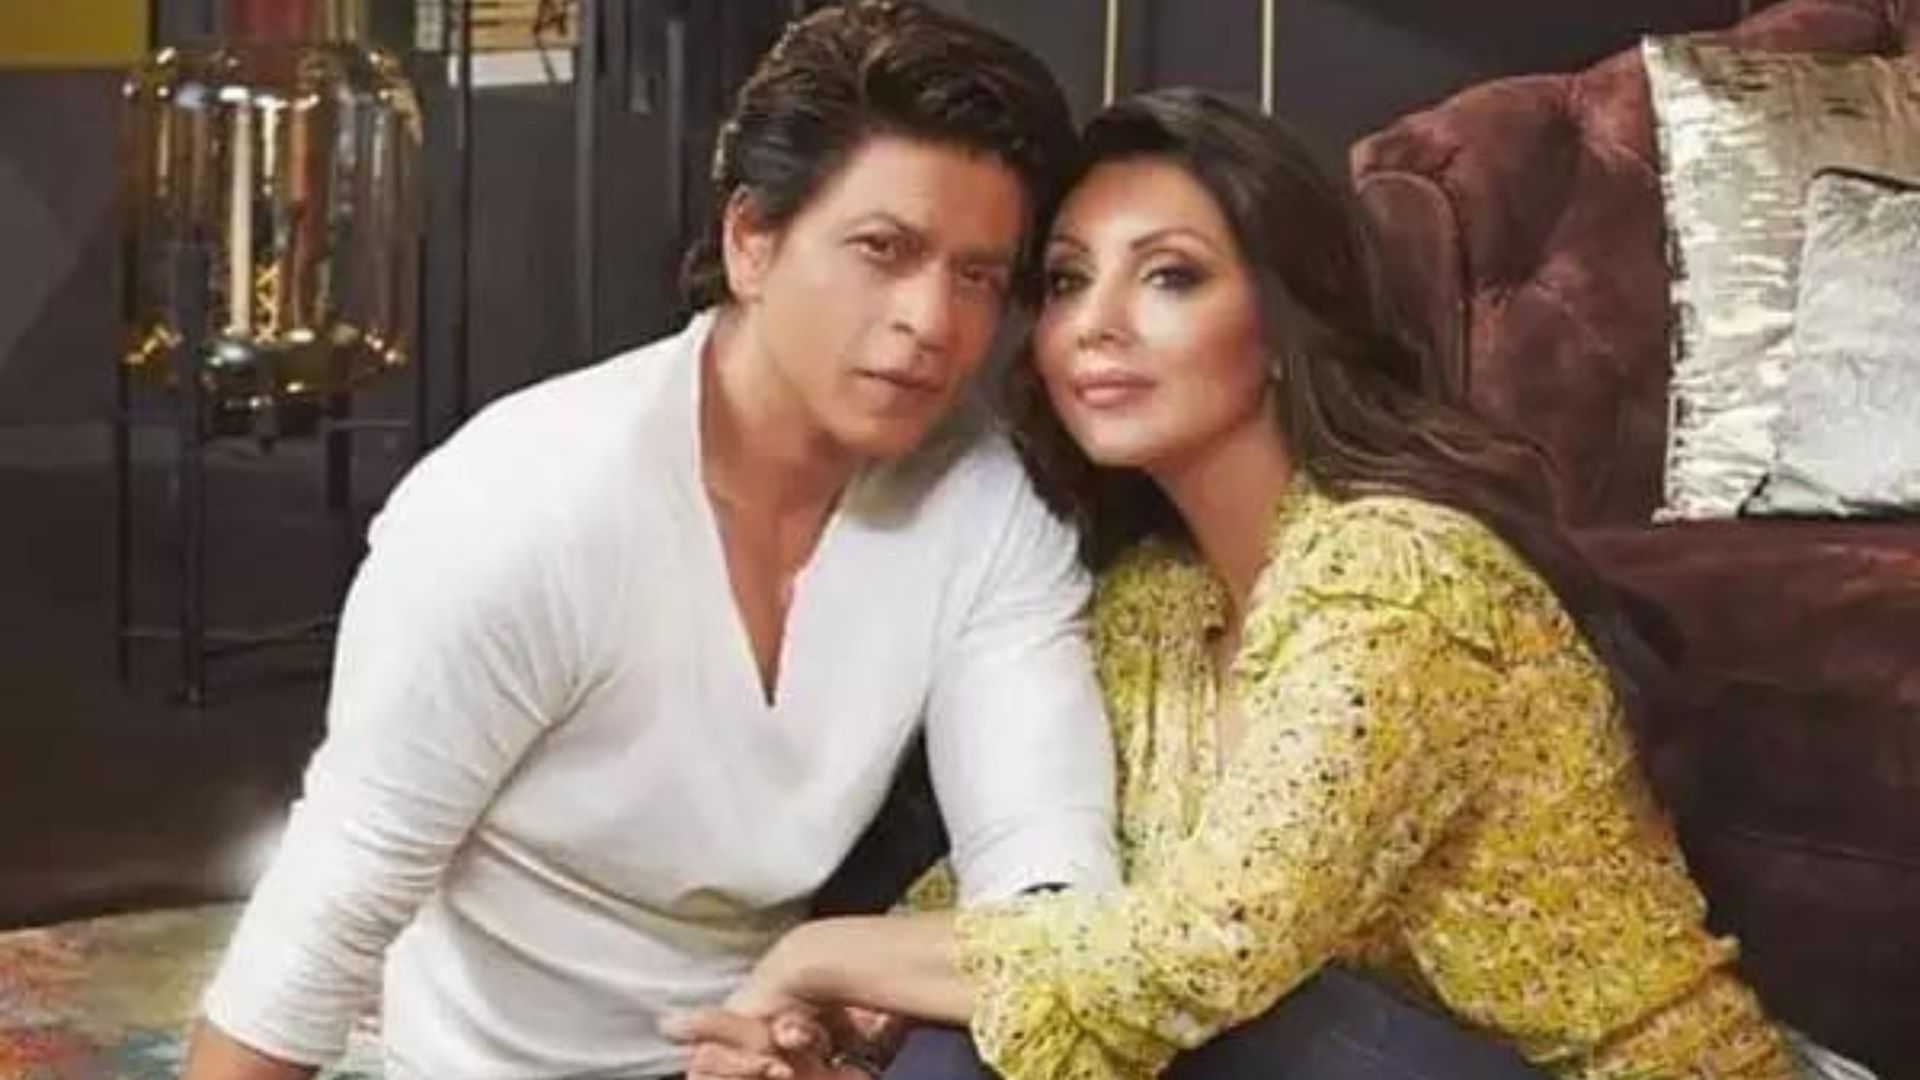 Shah Rukh Khan's wife Gauri Khan lands in legal trouble, case registered against the interior designer in Lucknow